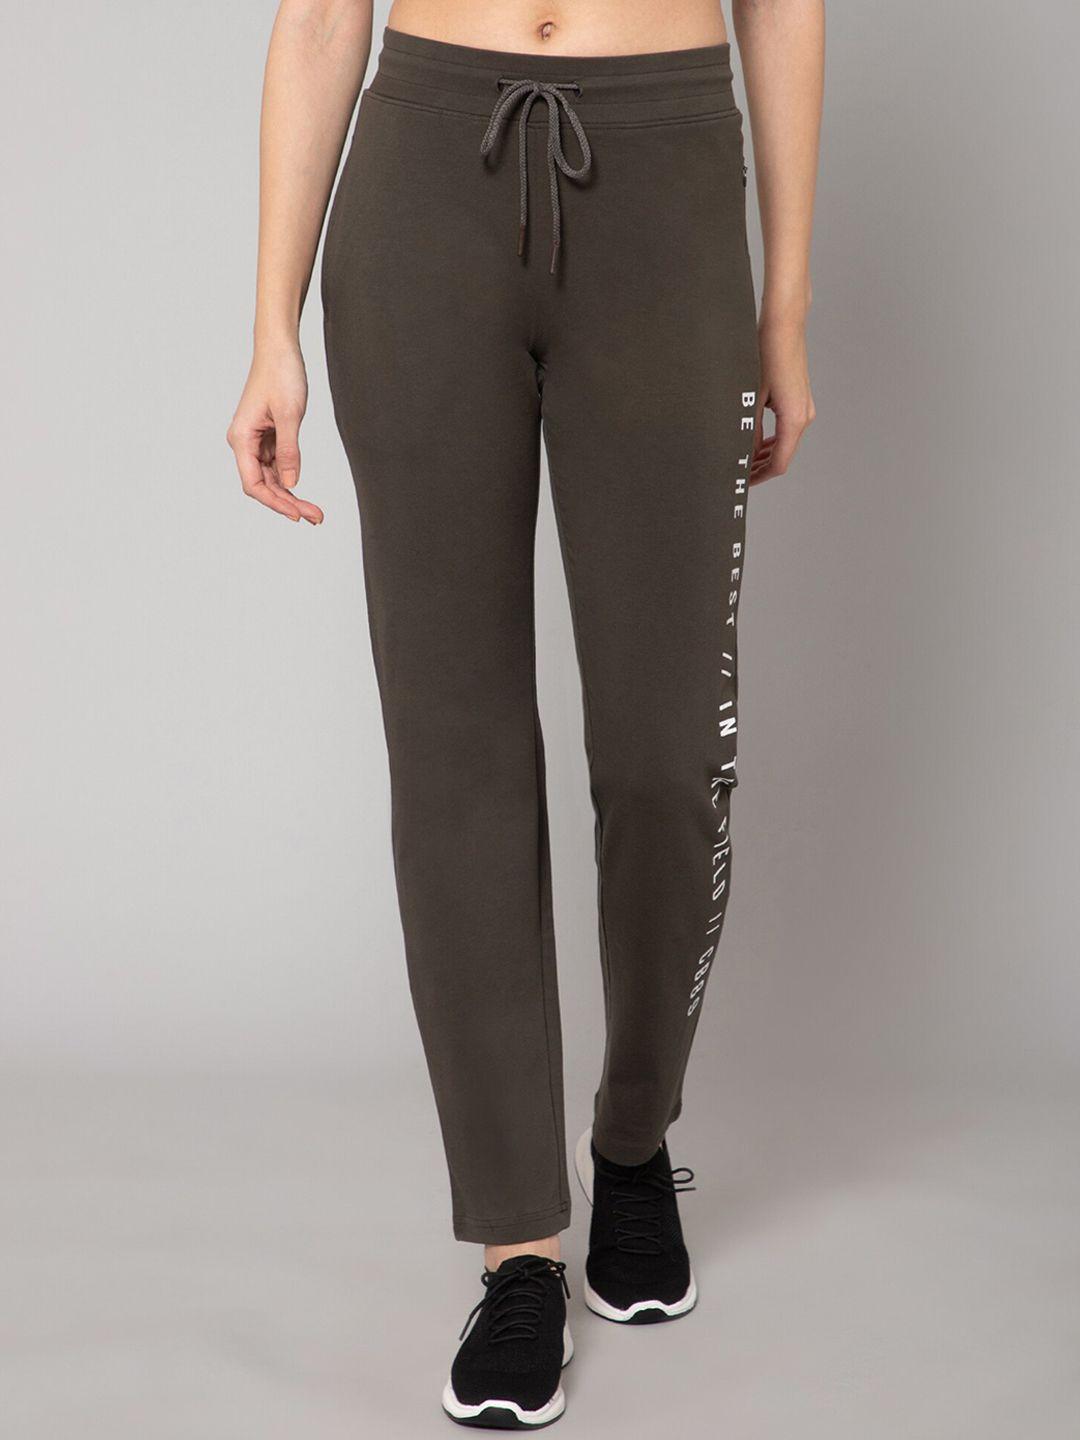 cantabil-women-printed-detail-cotton-track-pant